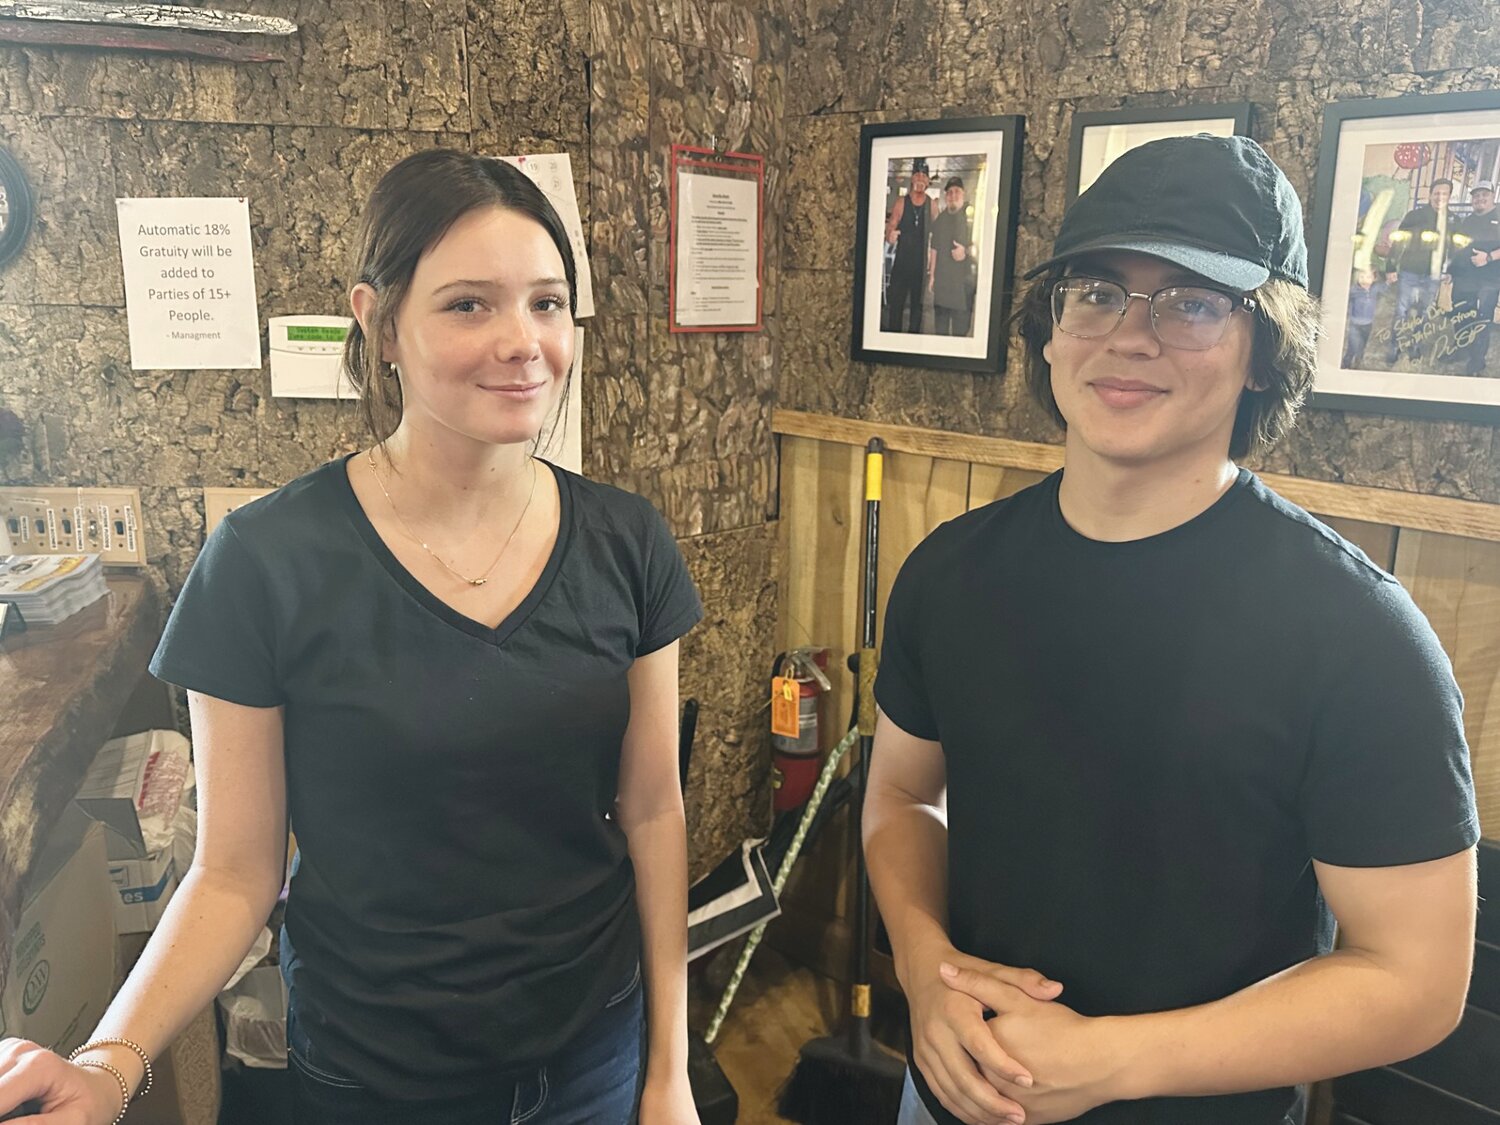 Clay High’s Bailey Allbritton and Ridgeview’s Dominick Ostrom, both 16, work as hosts at Dalton’s Sports Grill in Lake Asbury. Both are old enough to continue their schedules as long as their duties don’t hazardous responsibilities.